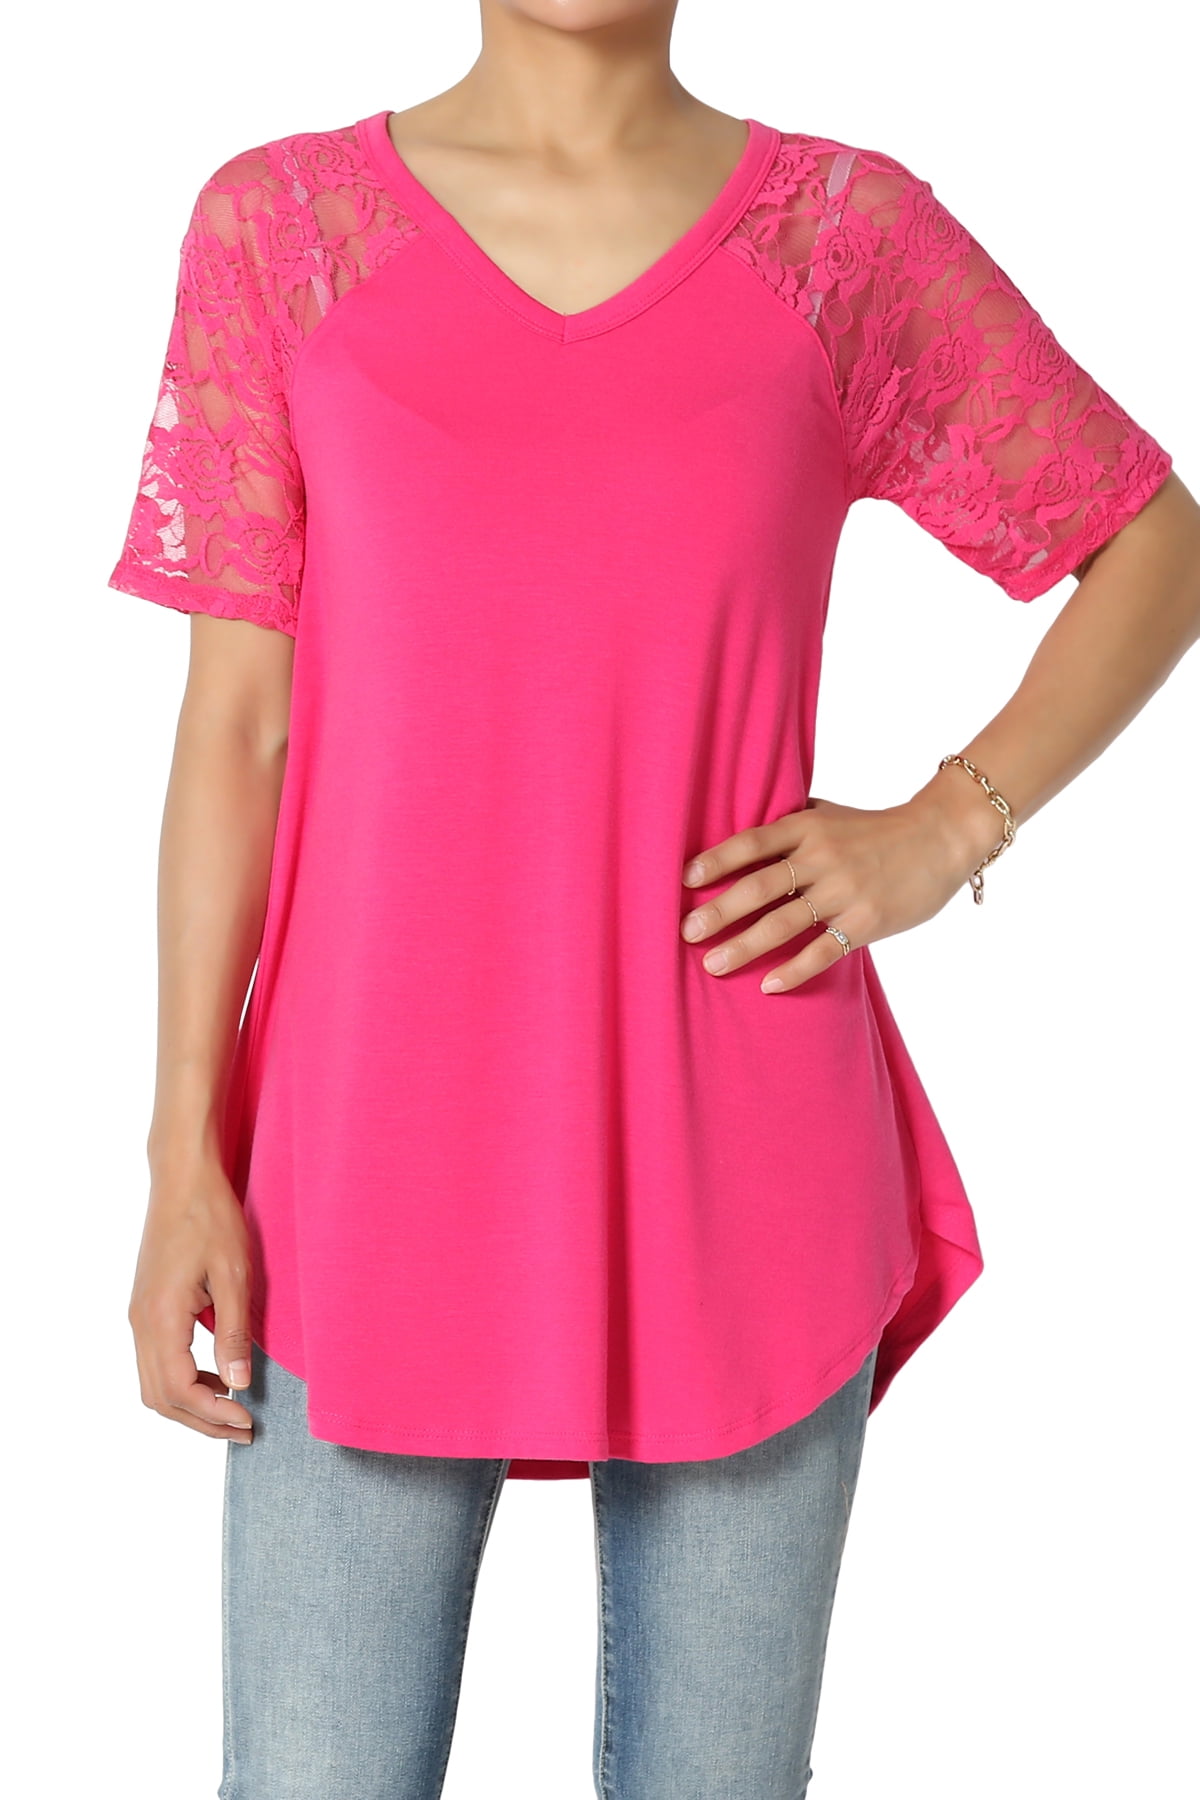 TheMogan Women's S~3X Lace-Sleeve Jersey Top V-Neck Extended Curved Hem ...